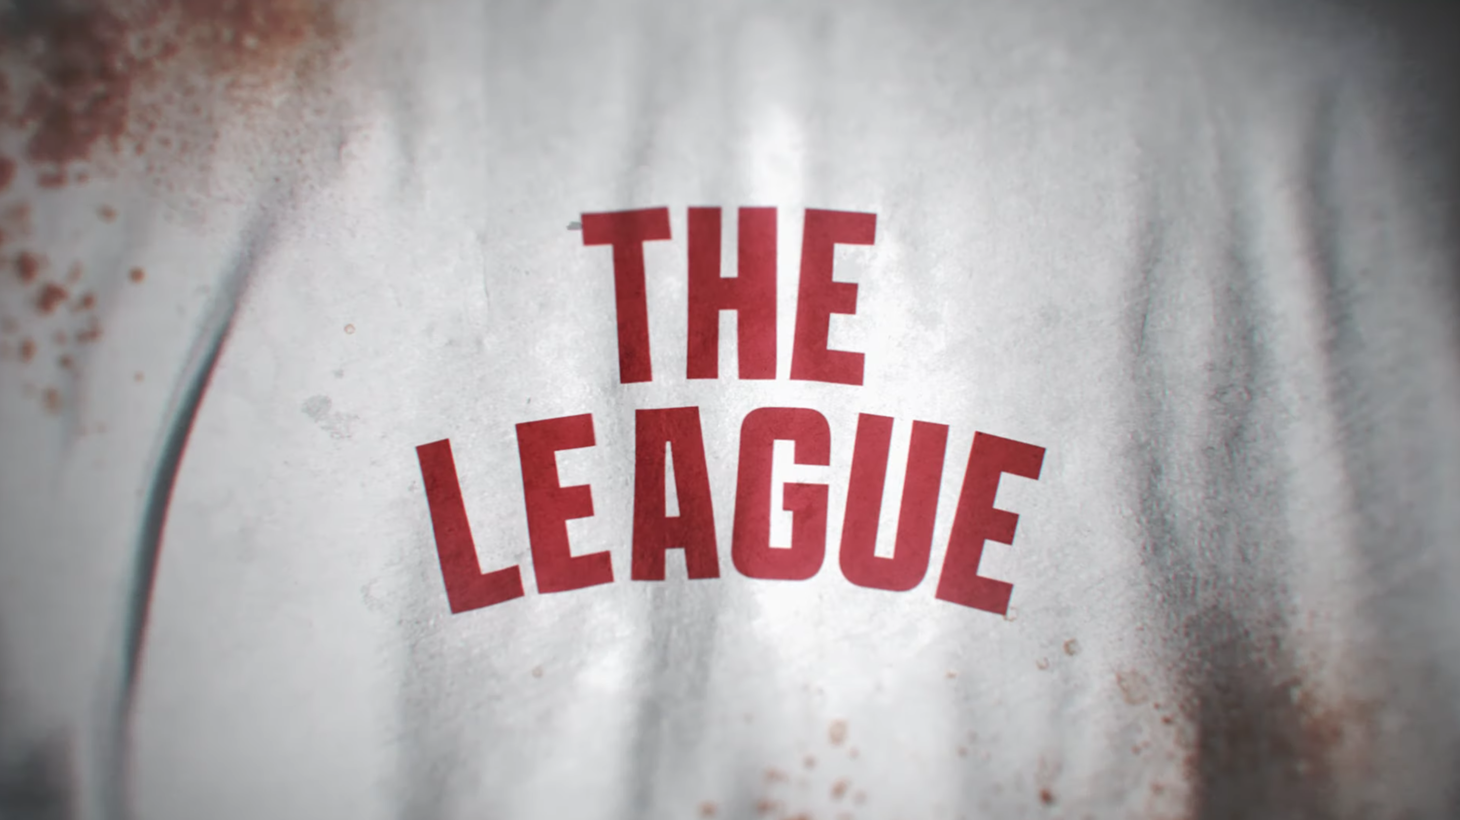 “I grew up being a huge, huge, huge, huge, huge, huge, huge, huge baseball fan,” says “The League” director Sam Pollard. “I was really excited about getting involved in [it]. It was another opportunity to delve into a history that I thought I knew something about.”